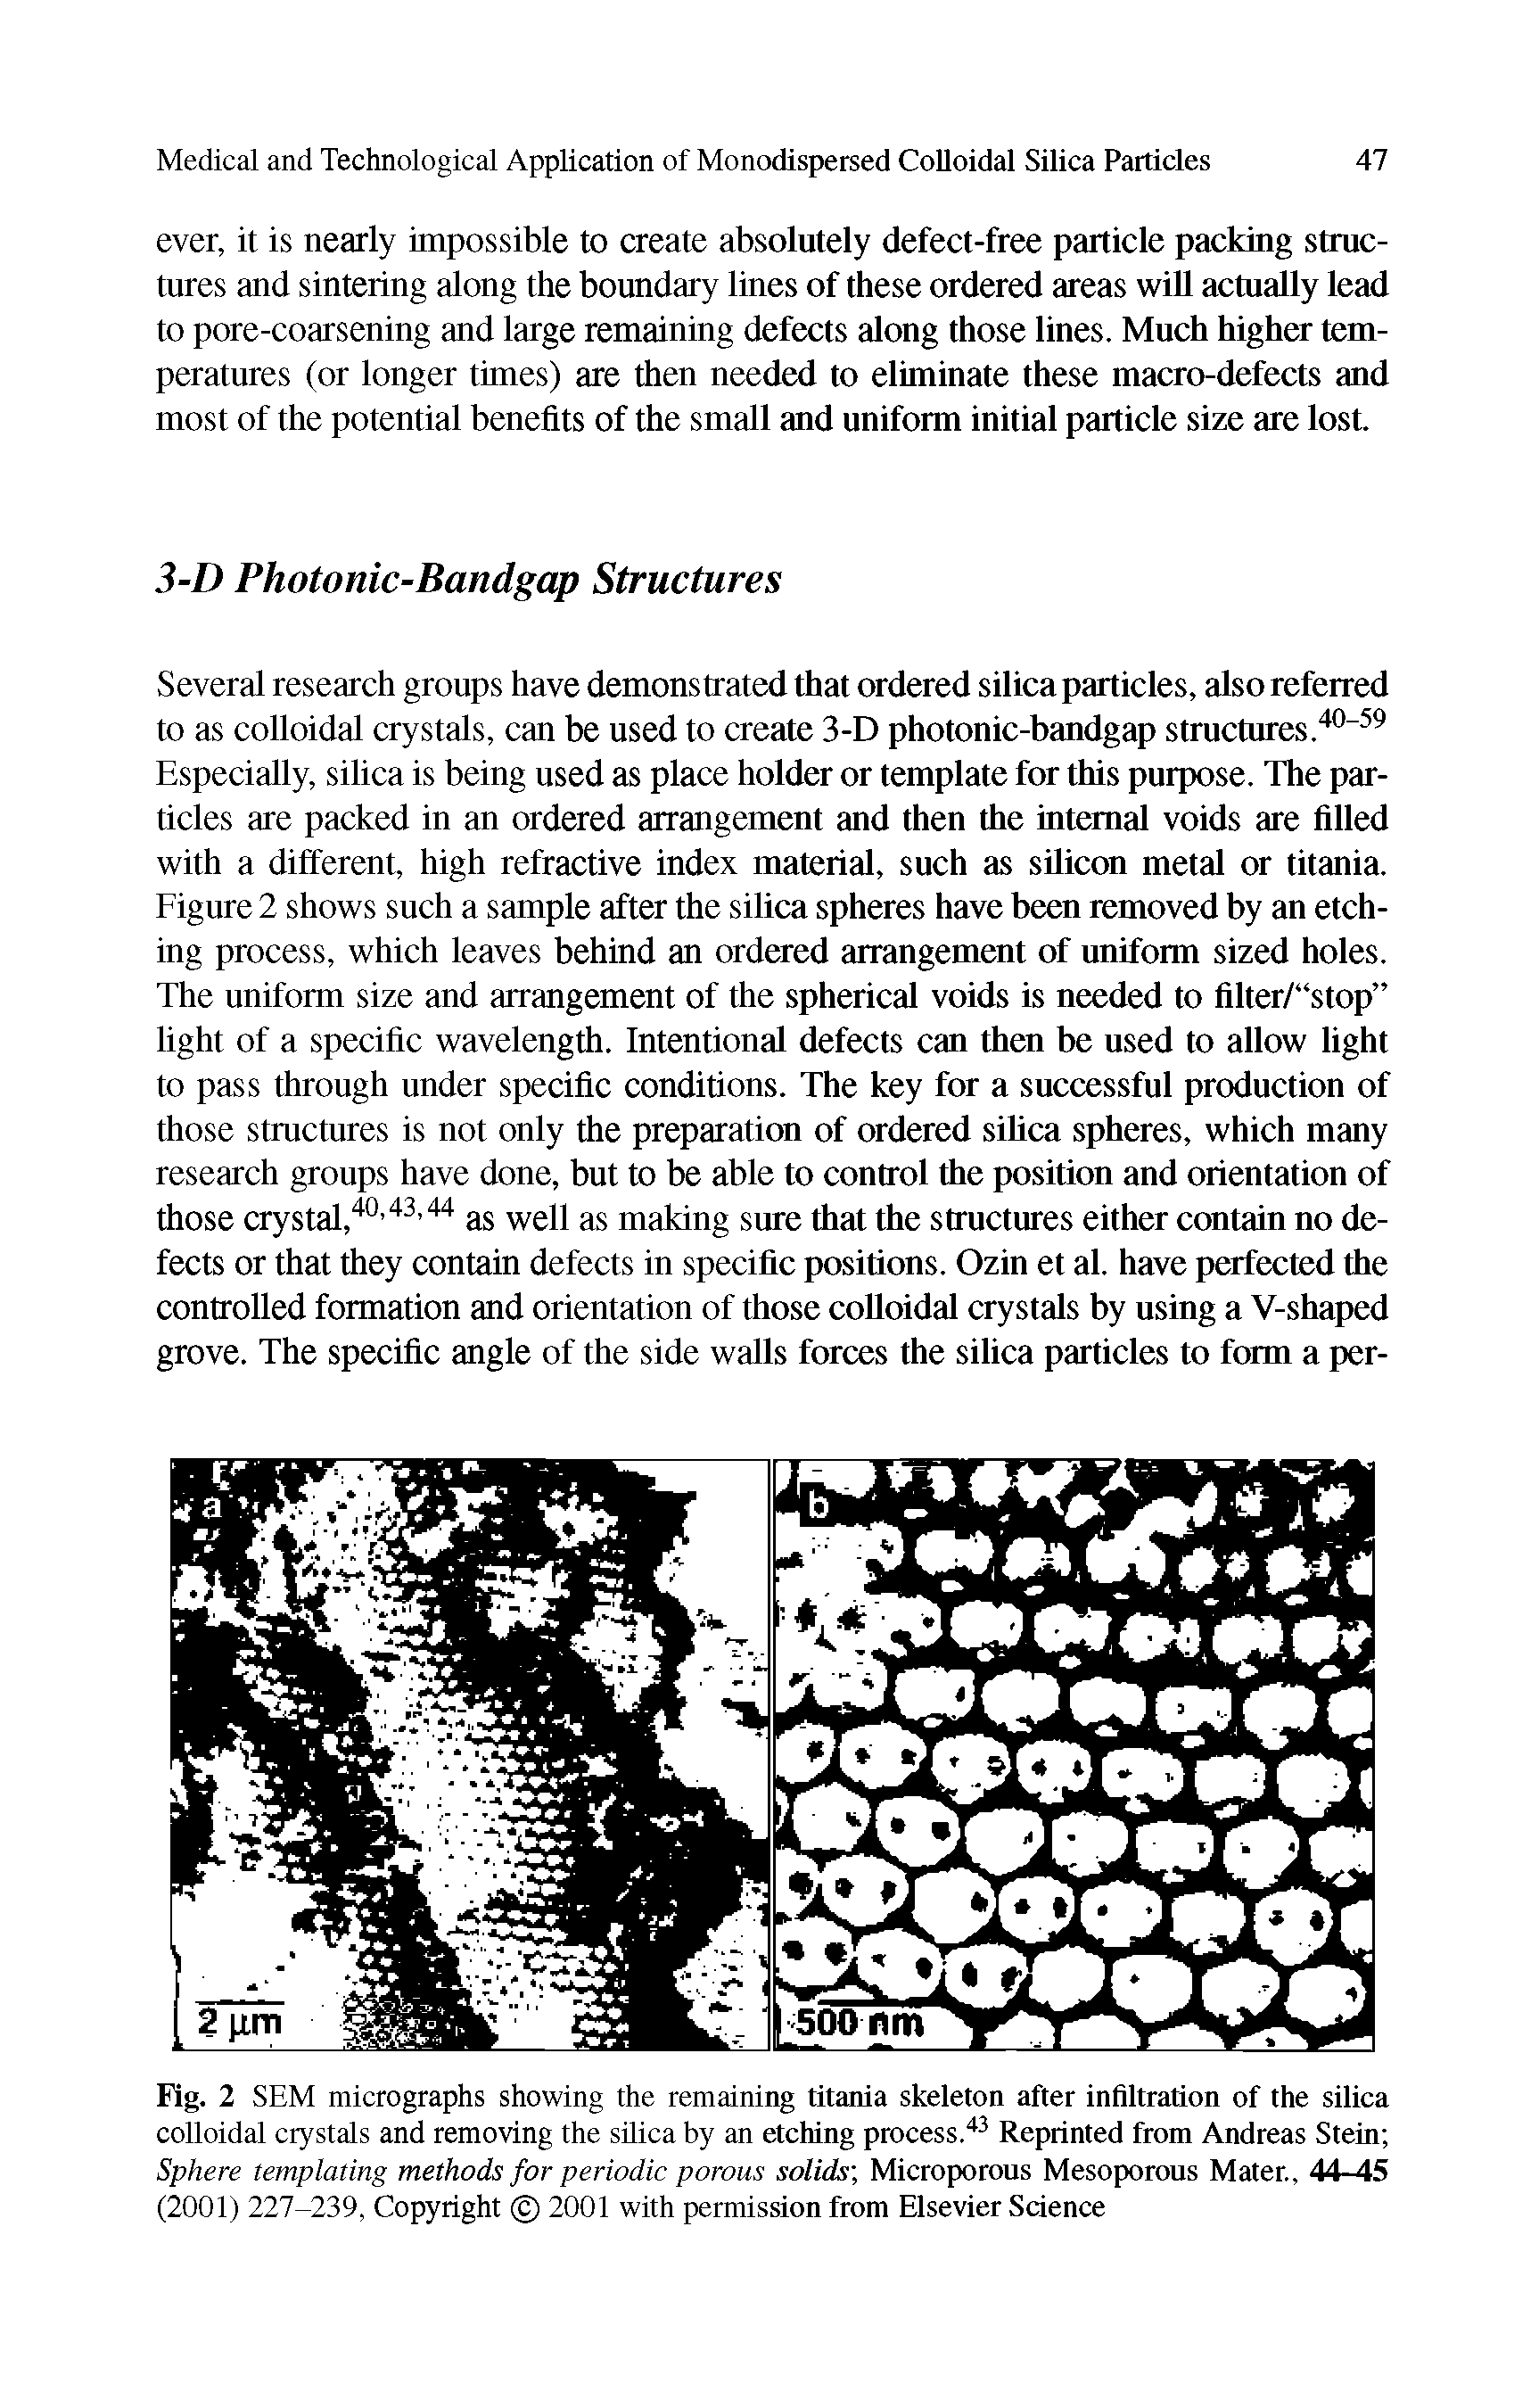 Fig. 2 SEM micrographs showing the remaining titania skeleton after infiltration of the silica colloidal crystals and removing the silica by an etching process. Reprinted from Andreas Stein Sphere templating methods for periodic porous solids, Microporous Mesoporous Mater., 44- 45 (2001) 227-239, Copyright 2001 with permission from Elsevier Science...